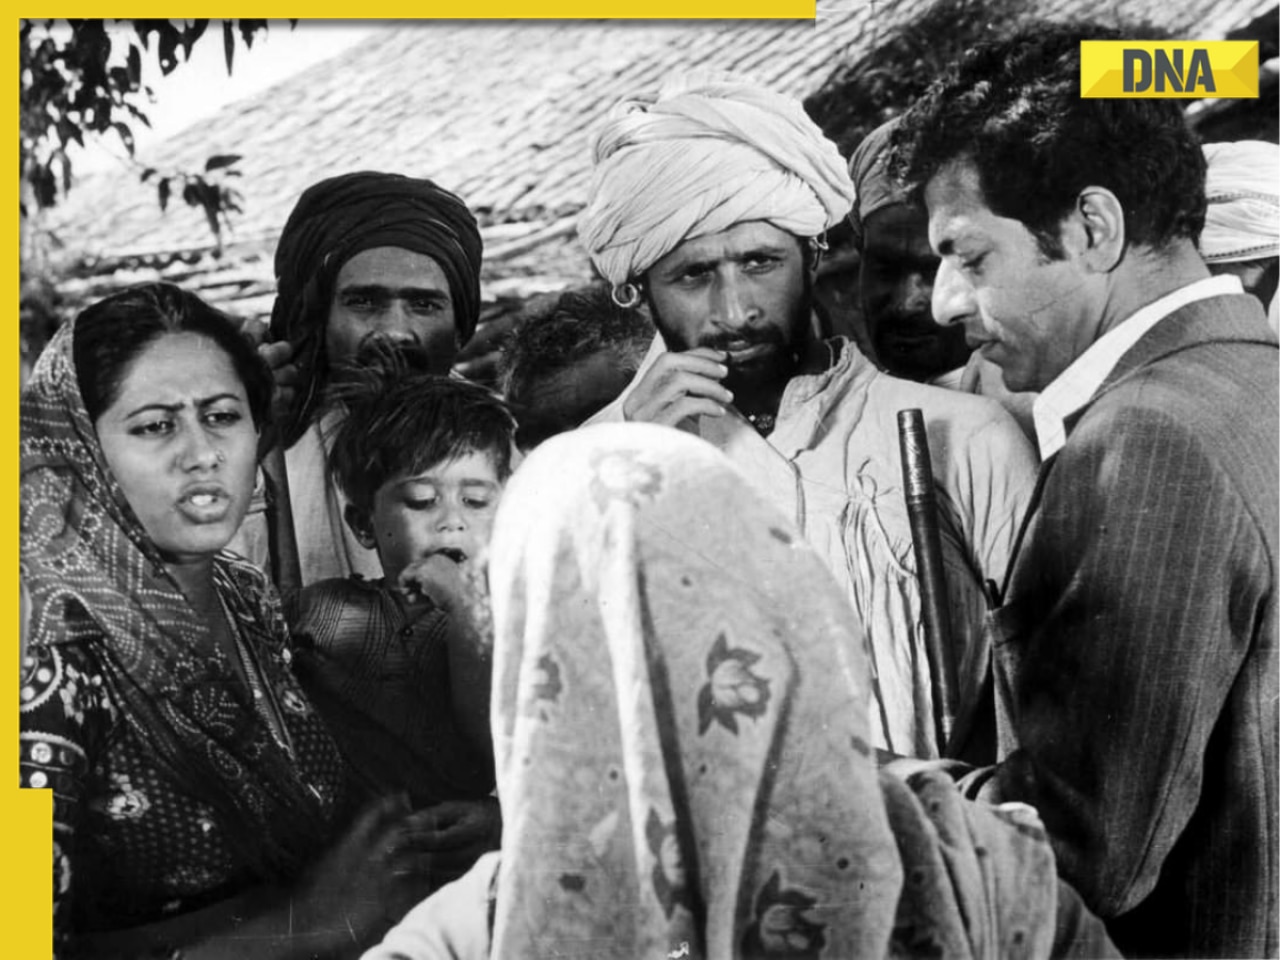 This film had 5 lakh producers, gave boost to Rs 52000-crore company, now got Cannes screening 48 years after release